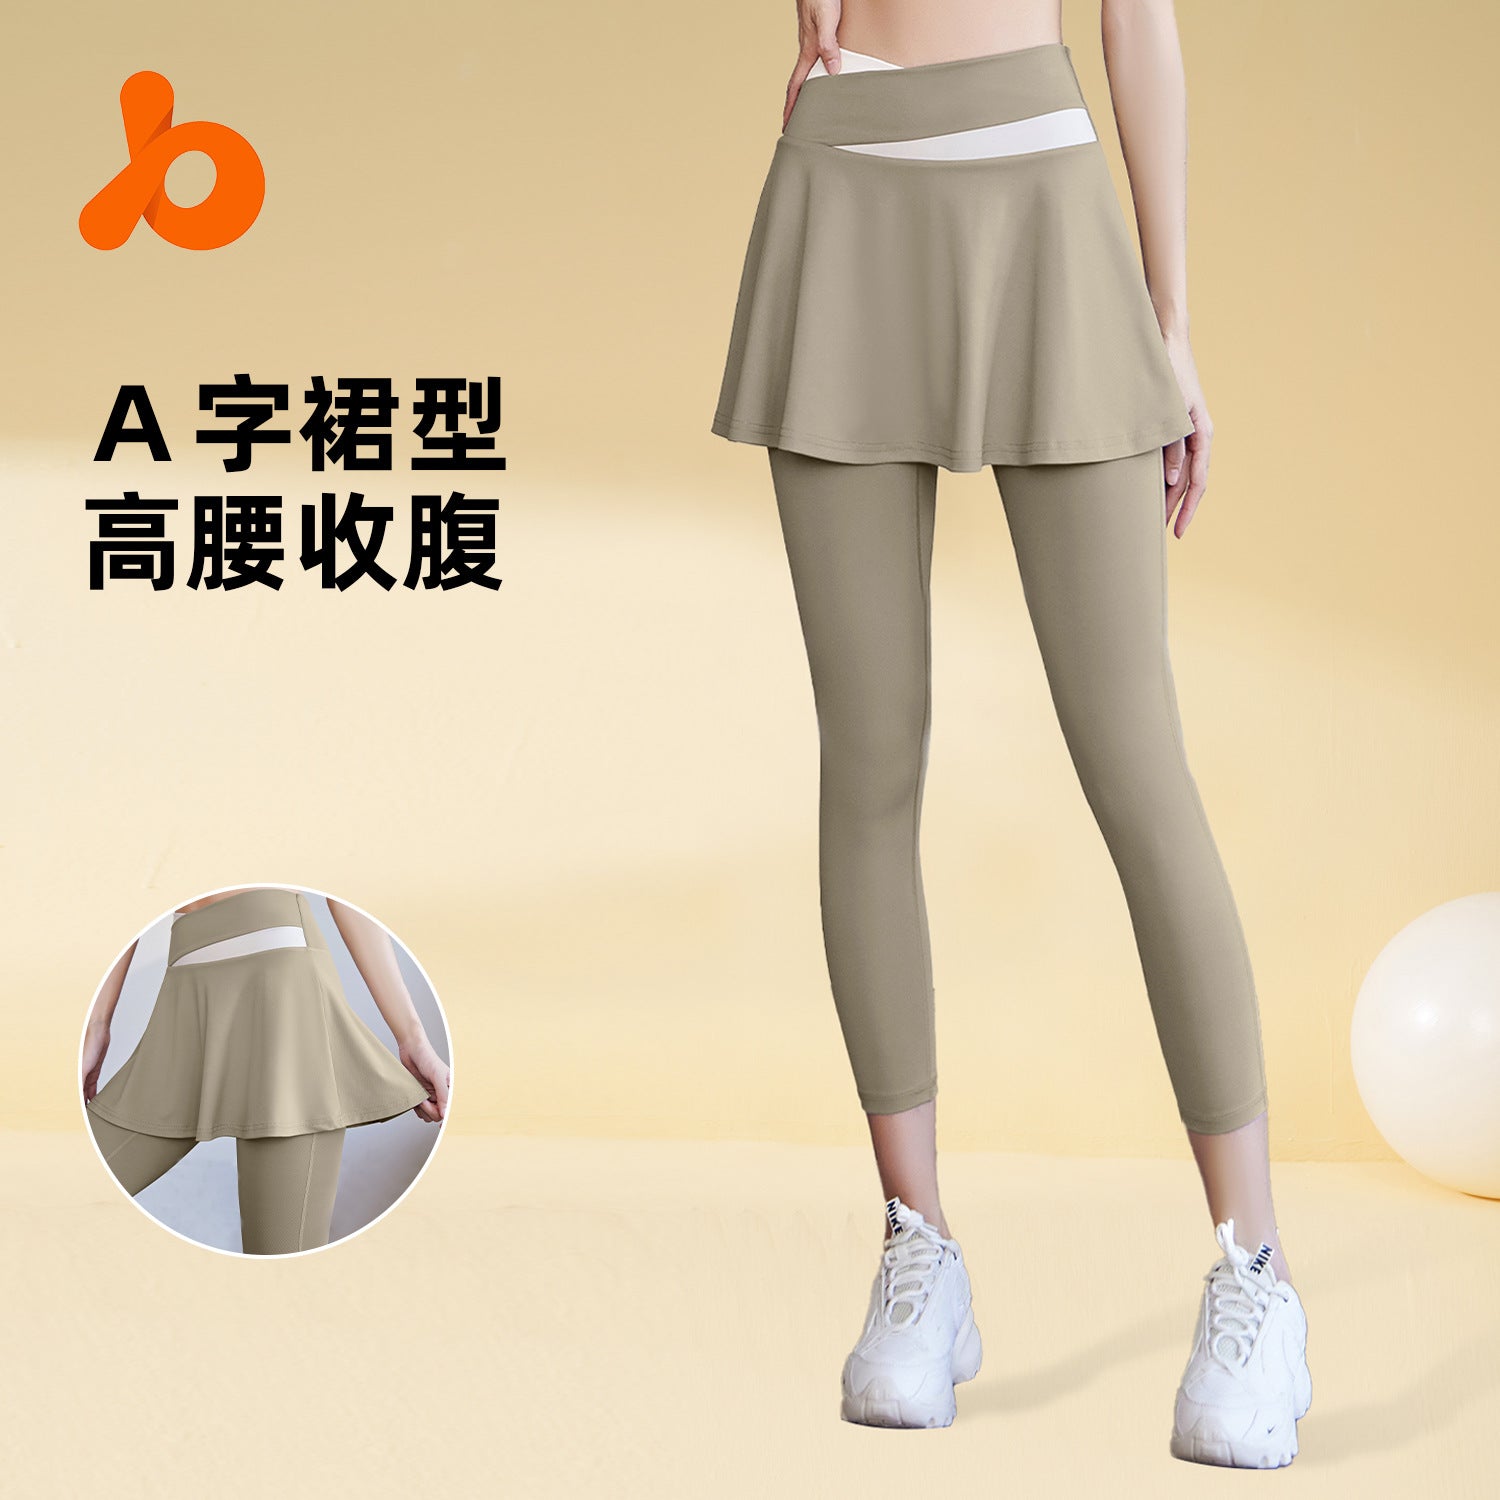 Juyitang's new fake two-piece anti-walking yoga pants nude high-elastic color-blocked high-waisted hip lifting quick-drying fitness pants